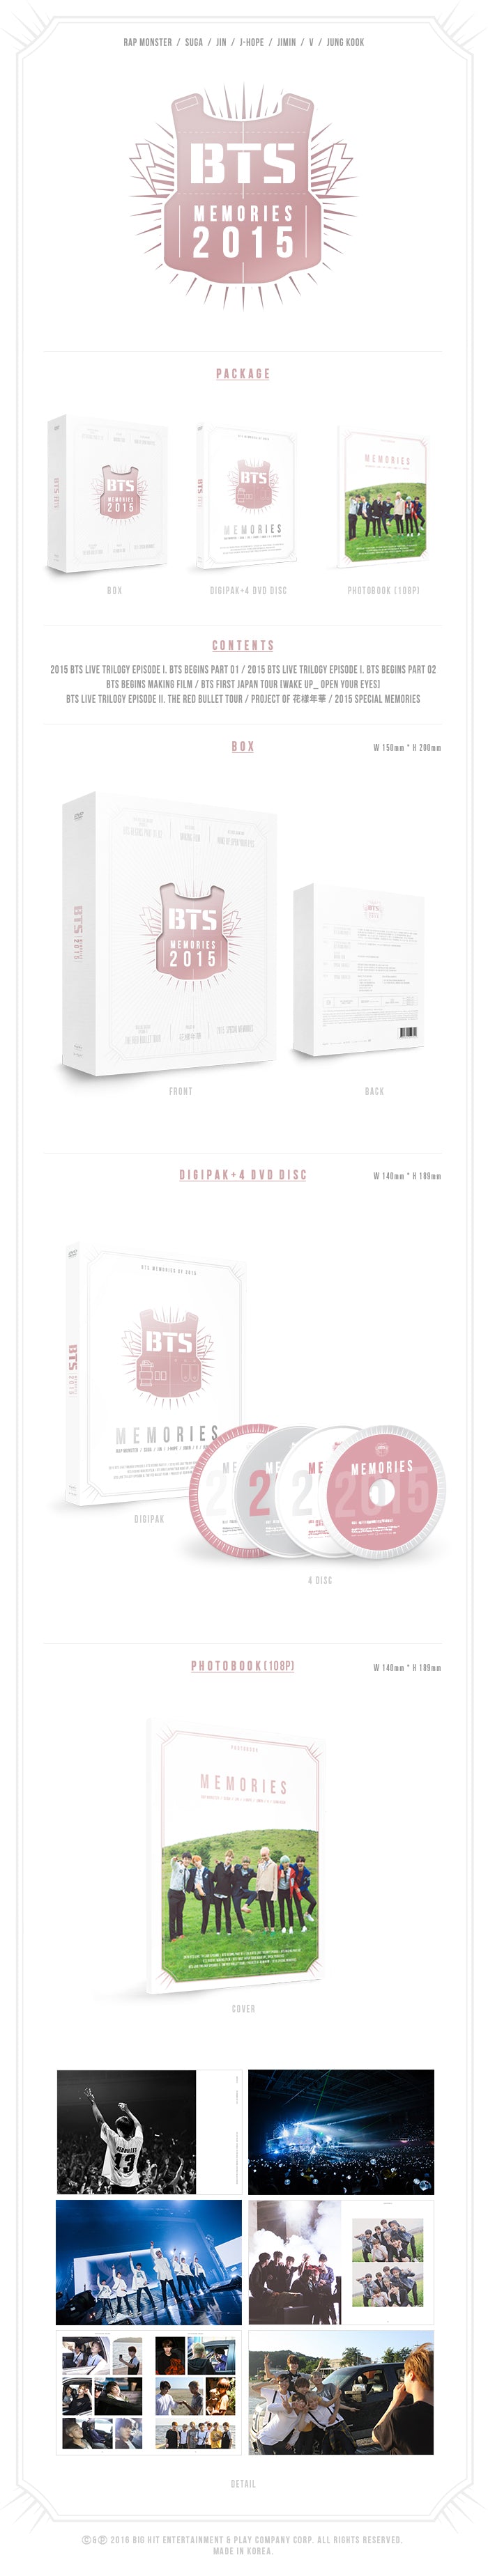 4 DVDs
1 Special Photo Book (108 pages)